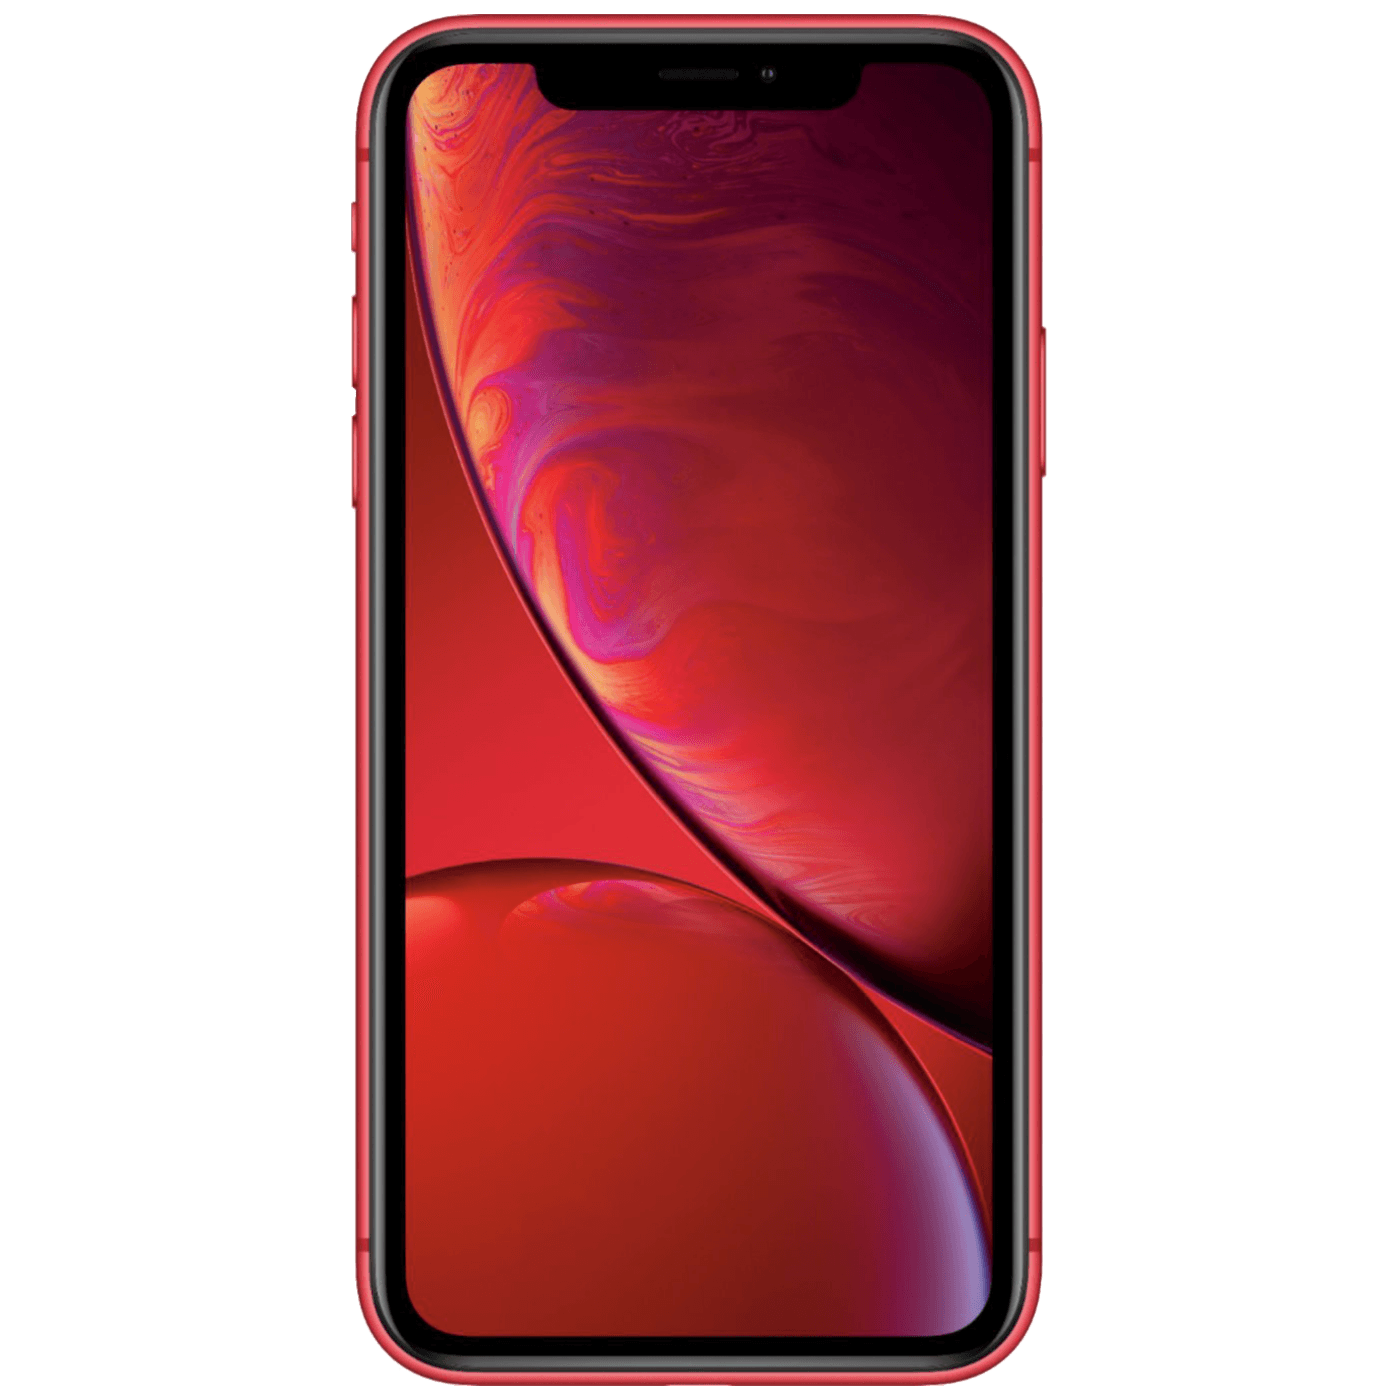 iPhone XR 64GB Red - Apple